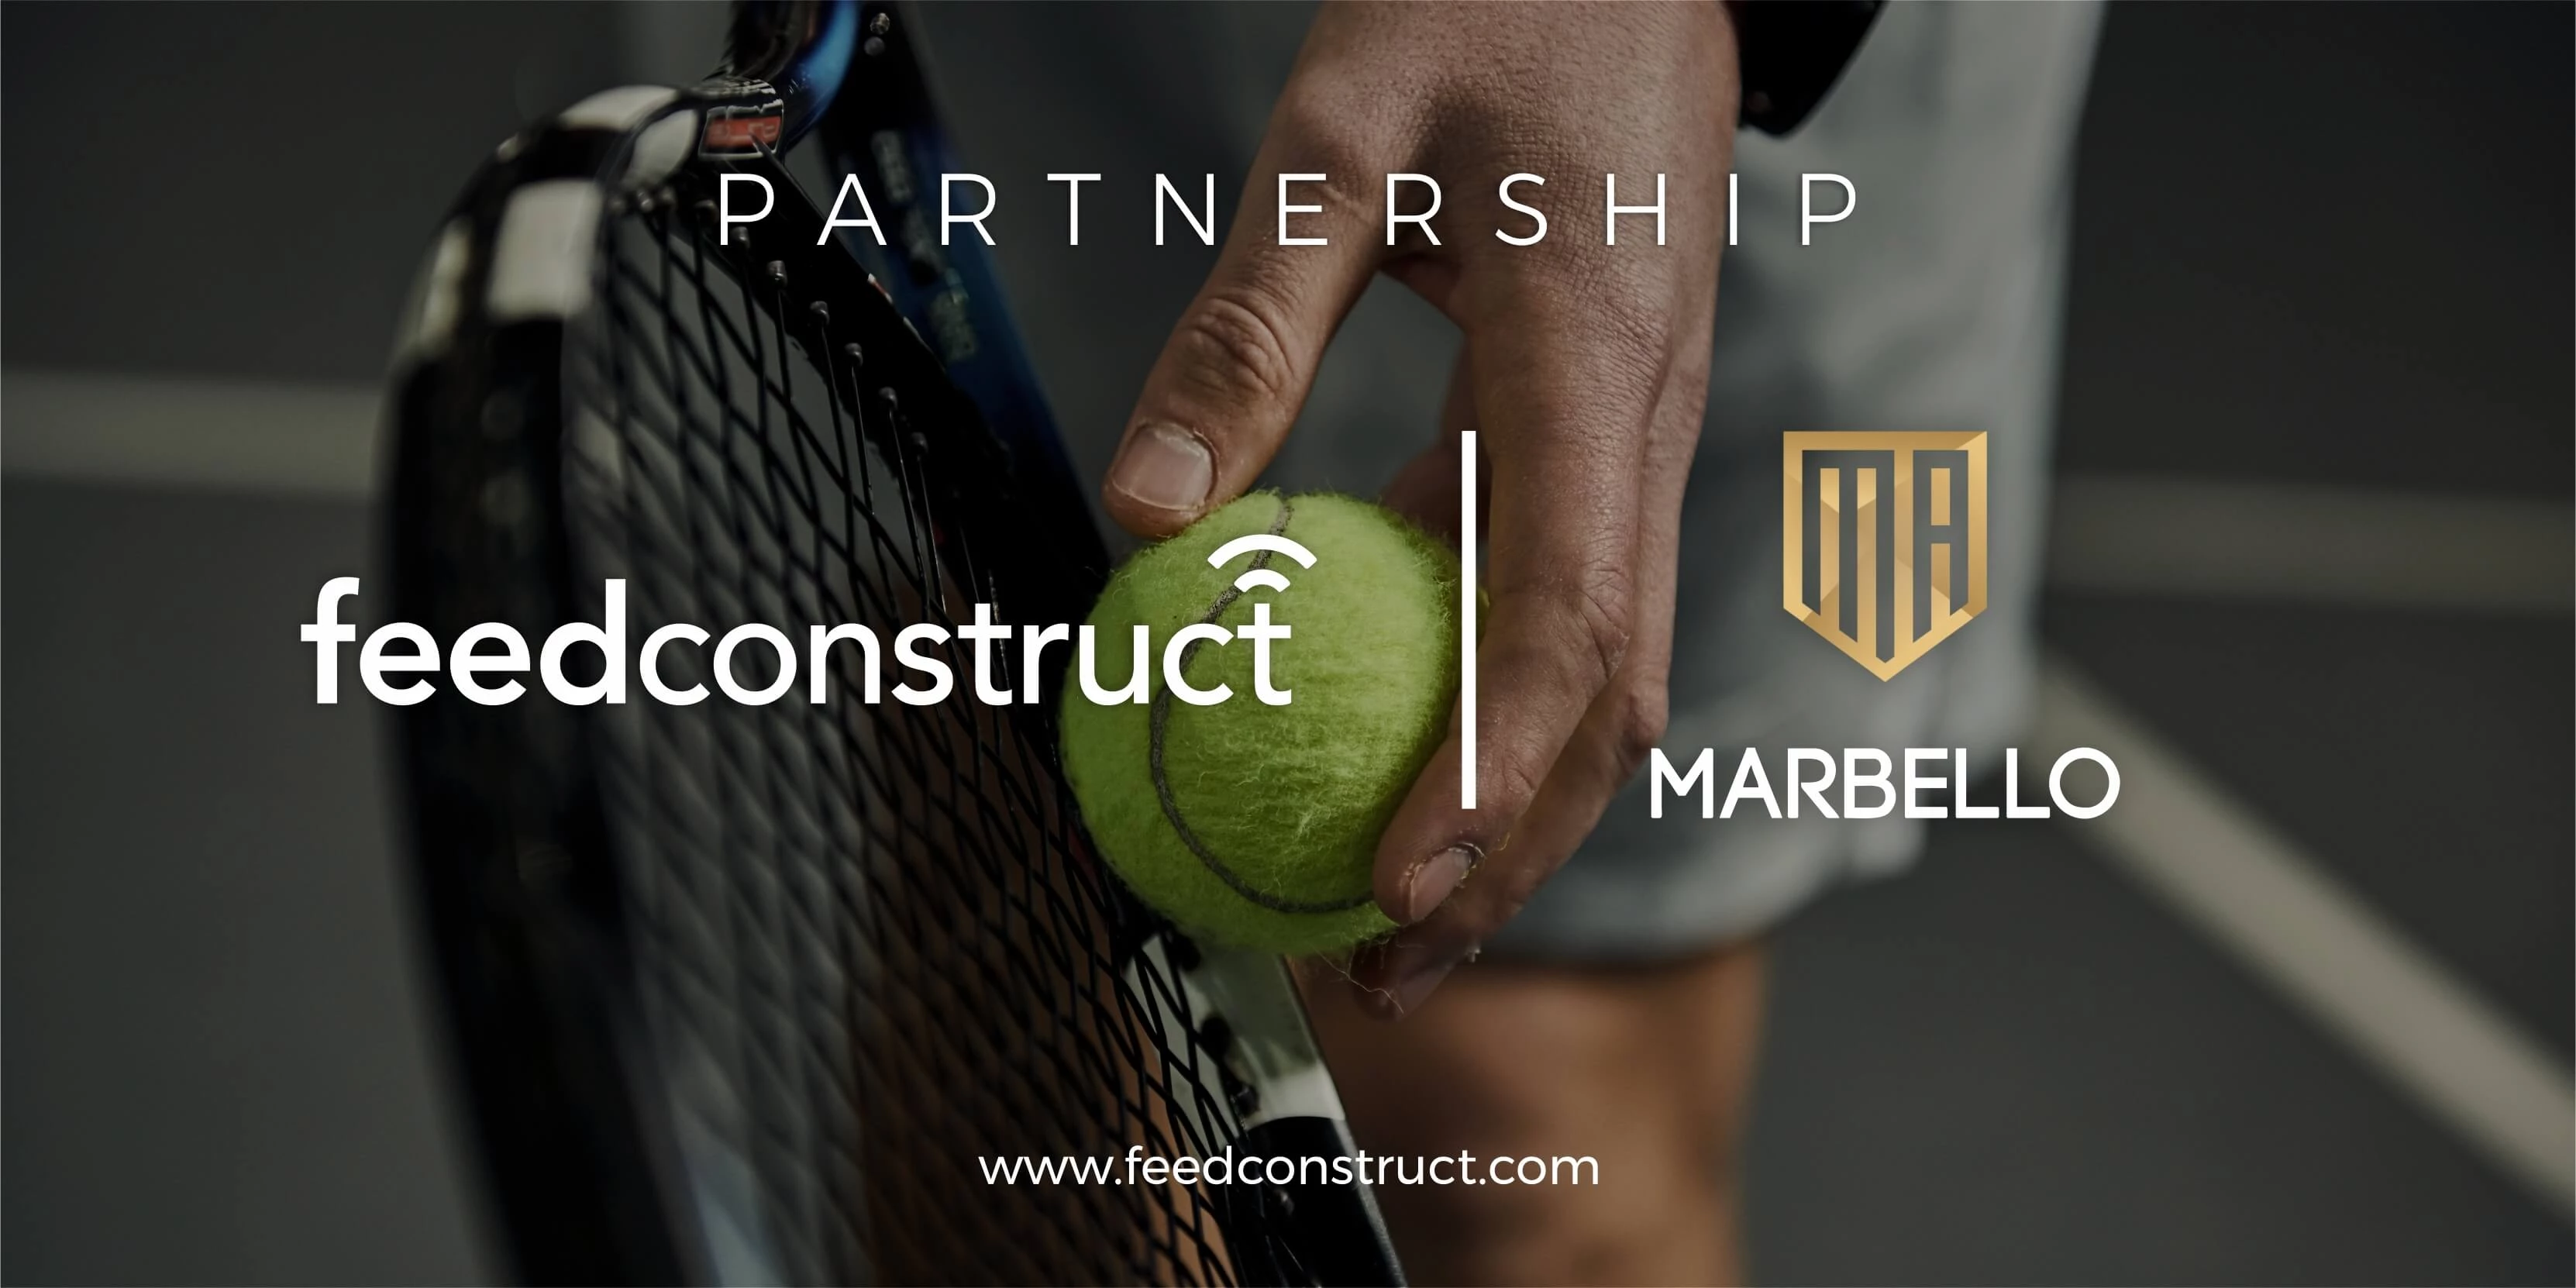 FeedConstruct is an official content partner of the Marbello Exhibition Series